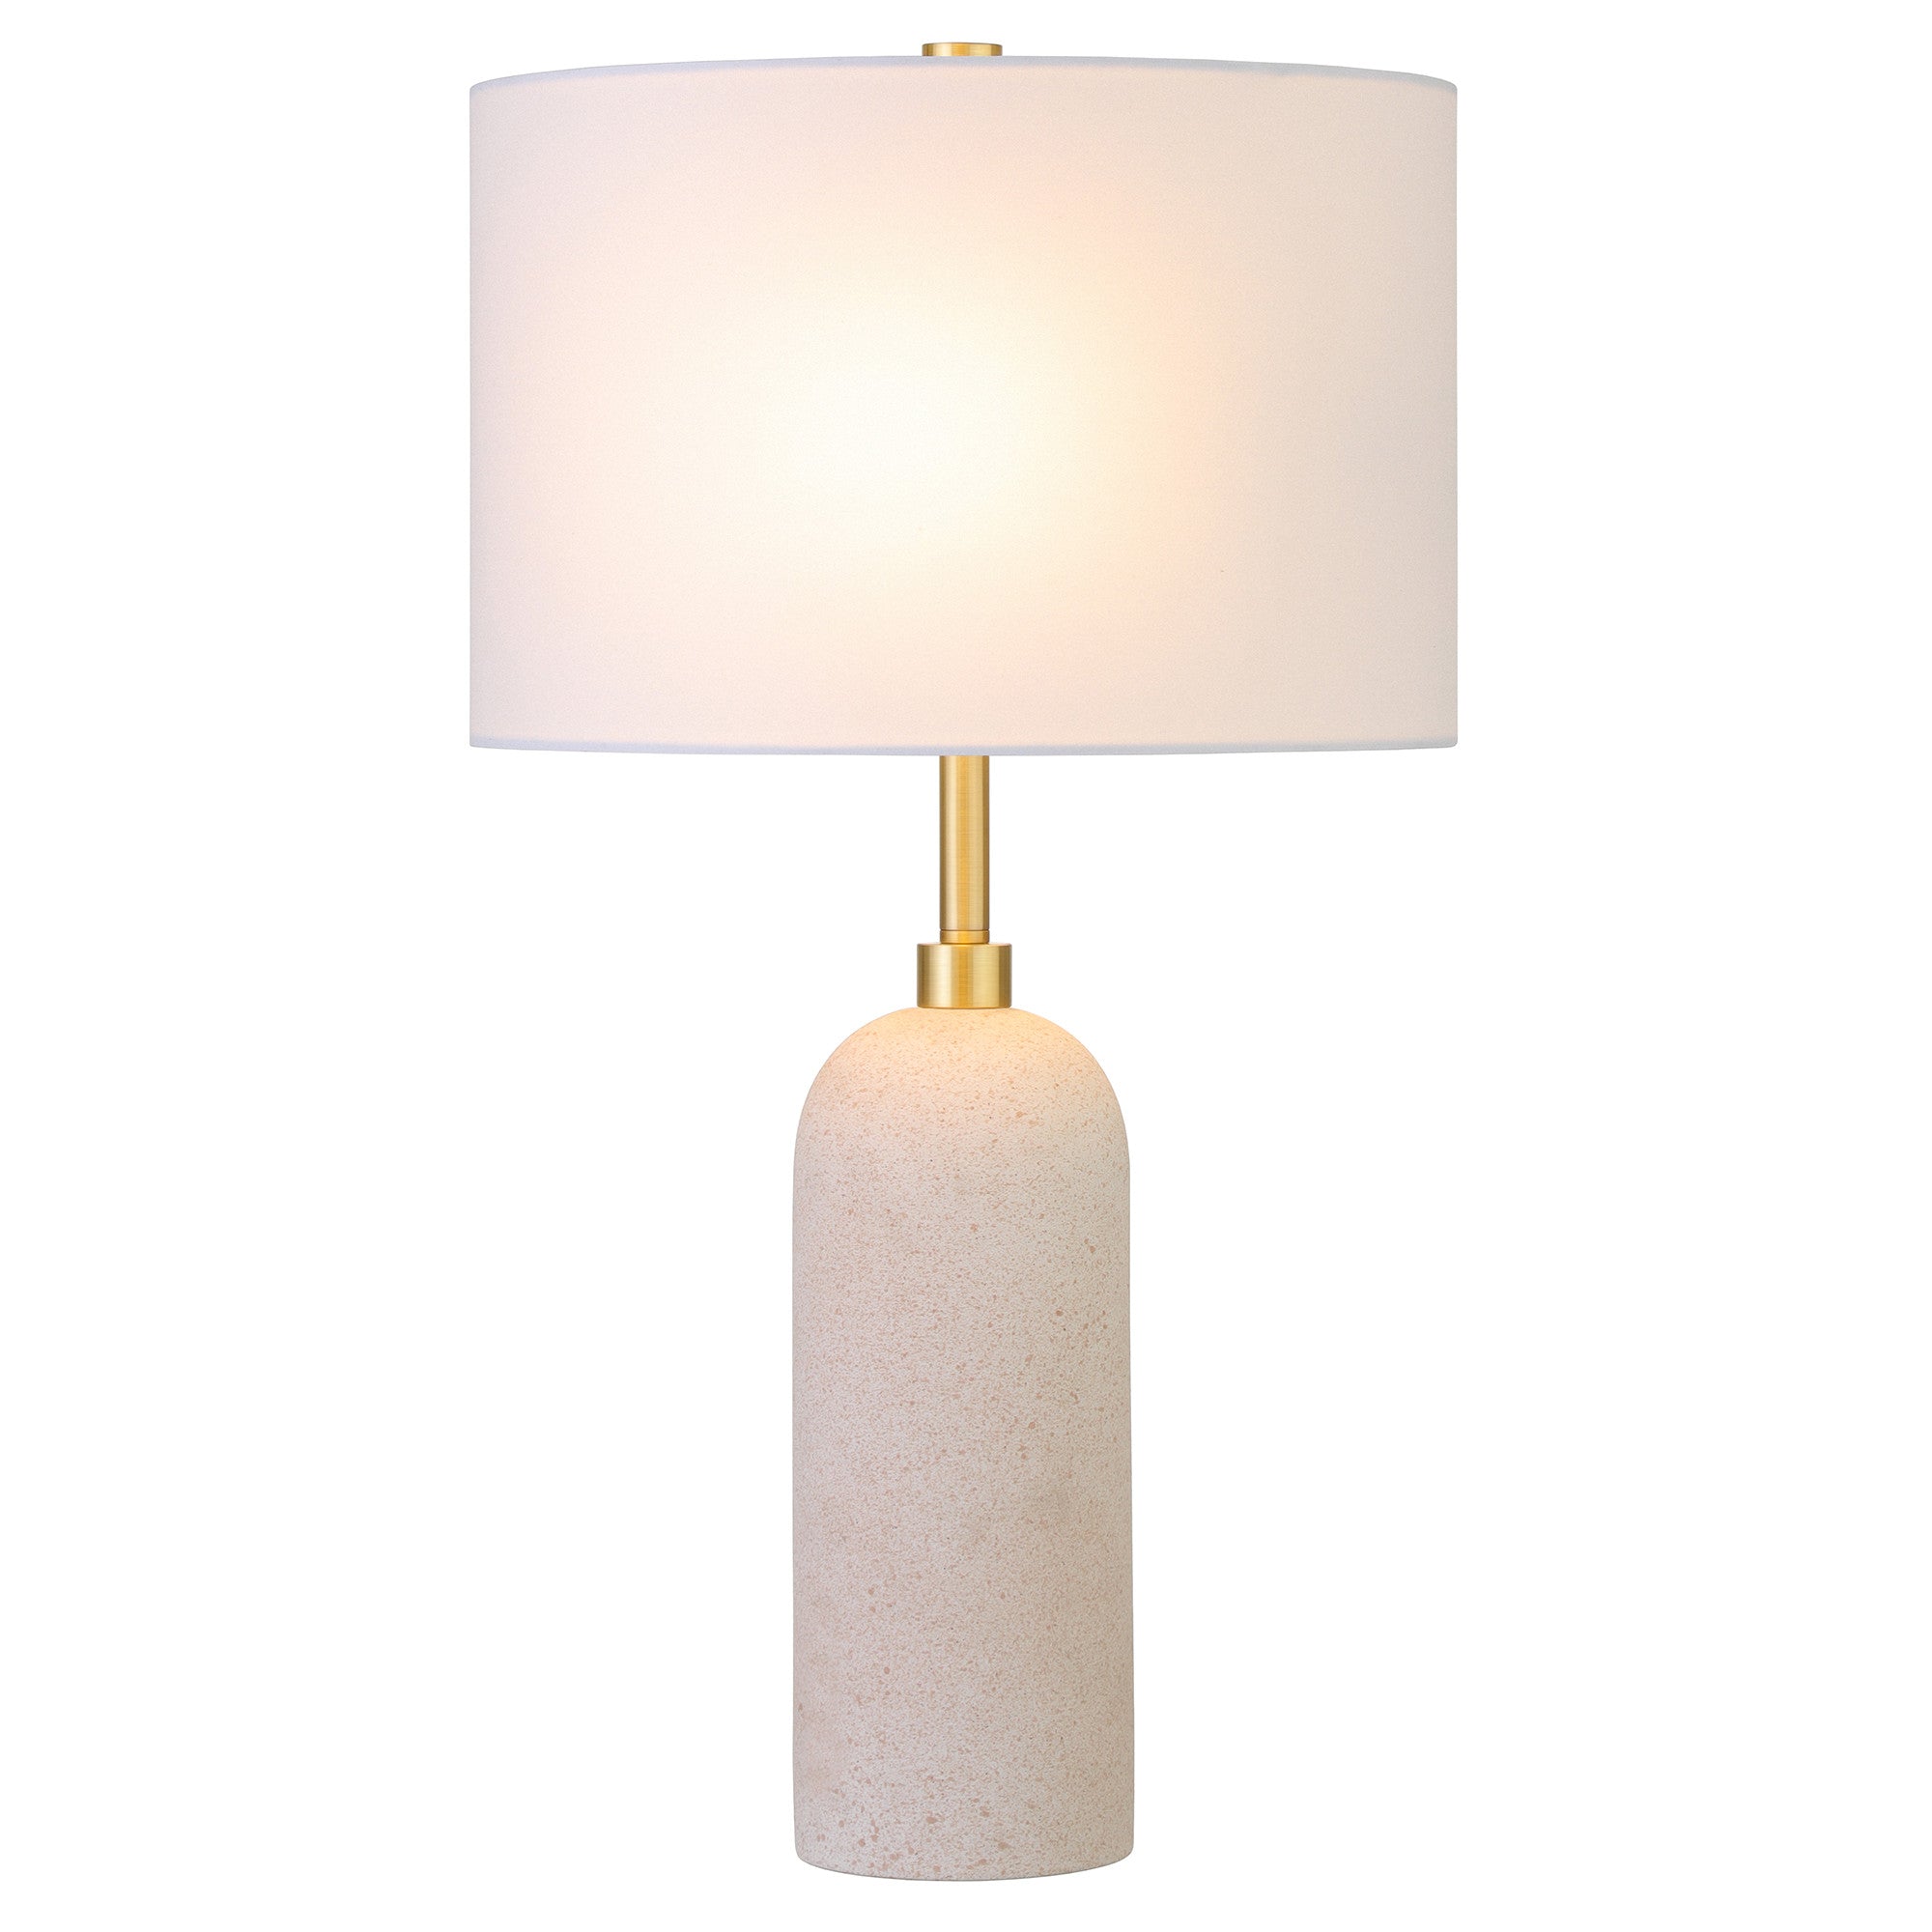 22" Sand Ceramic Table Lamp With White Drum Shade